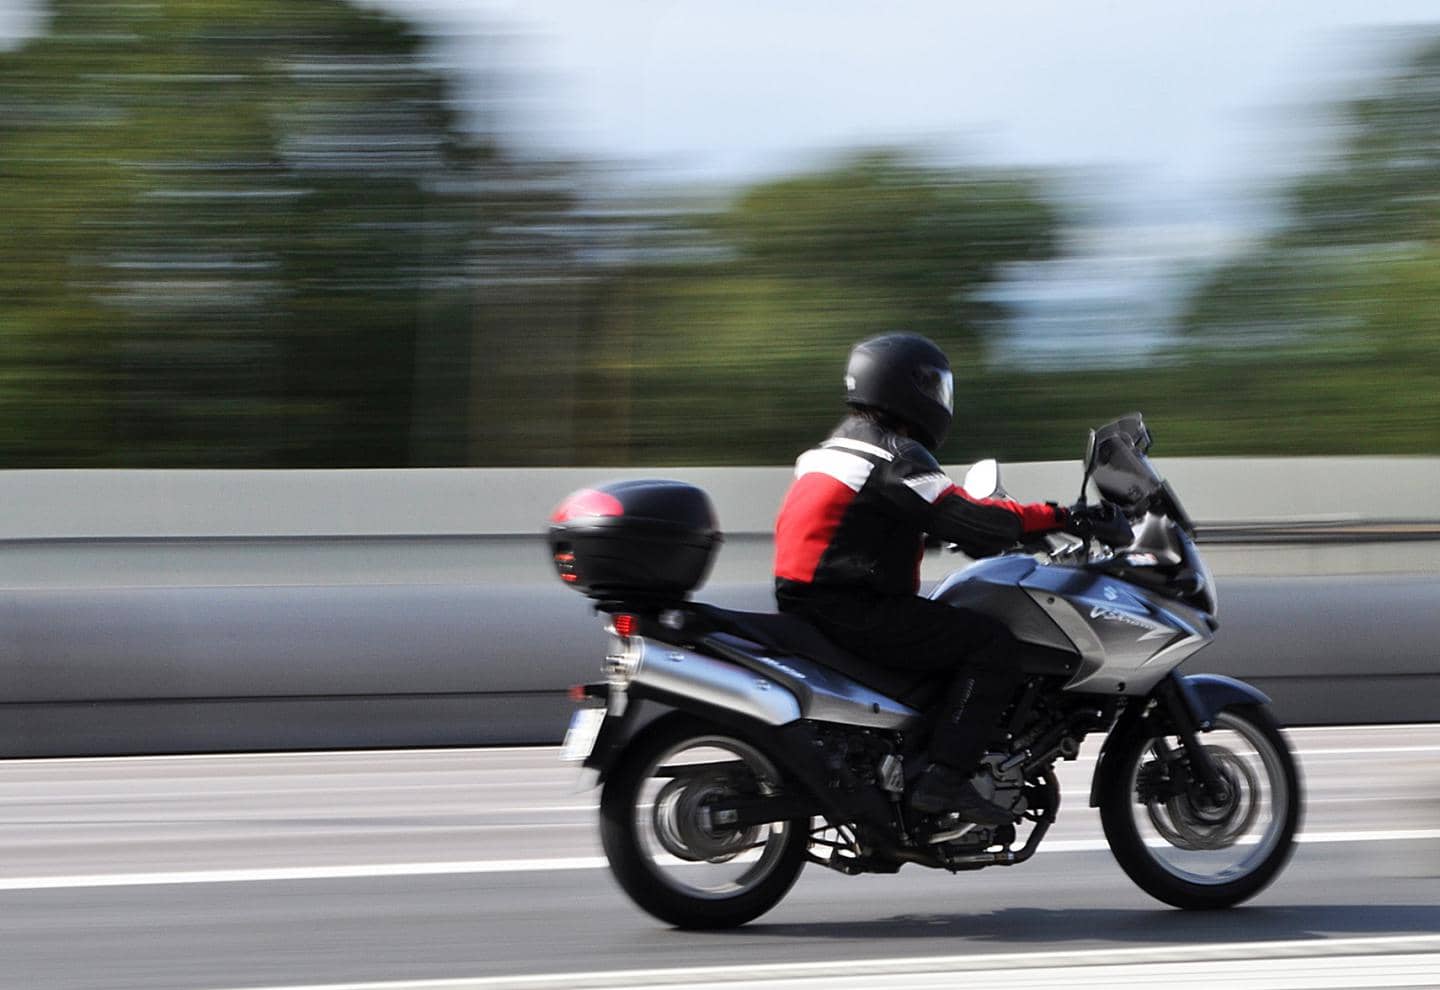 Motorcycle insurance – making sure you are properly covered on the road